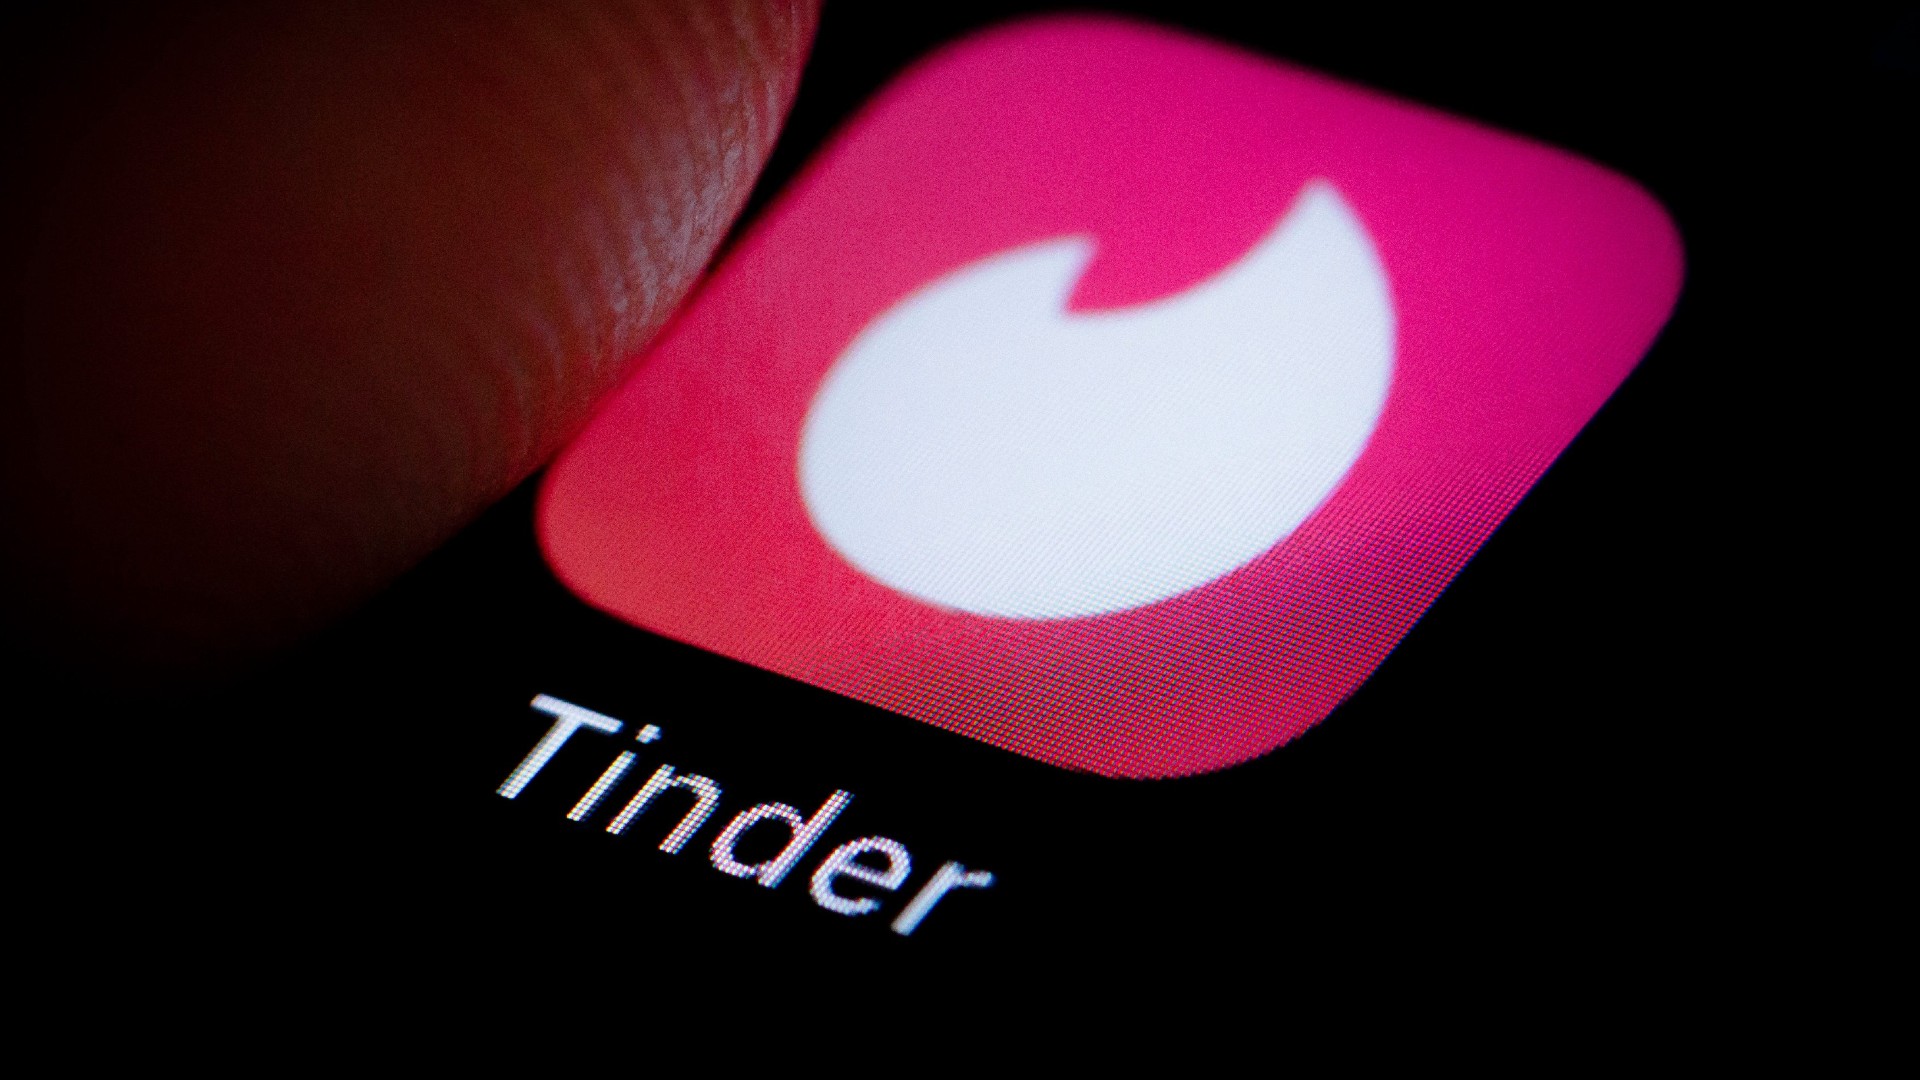 Getting your Tinder Profile Verified in Six Steps